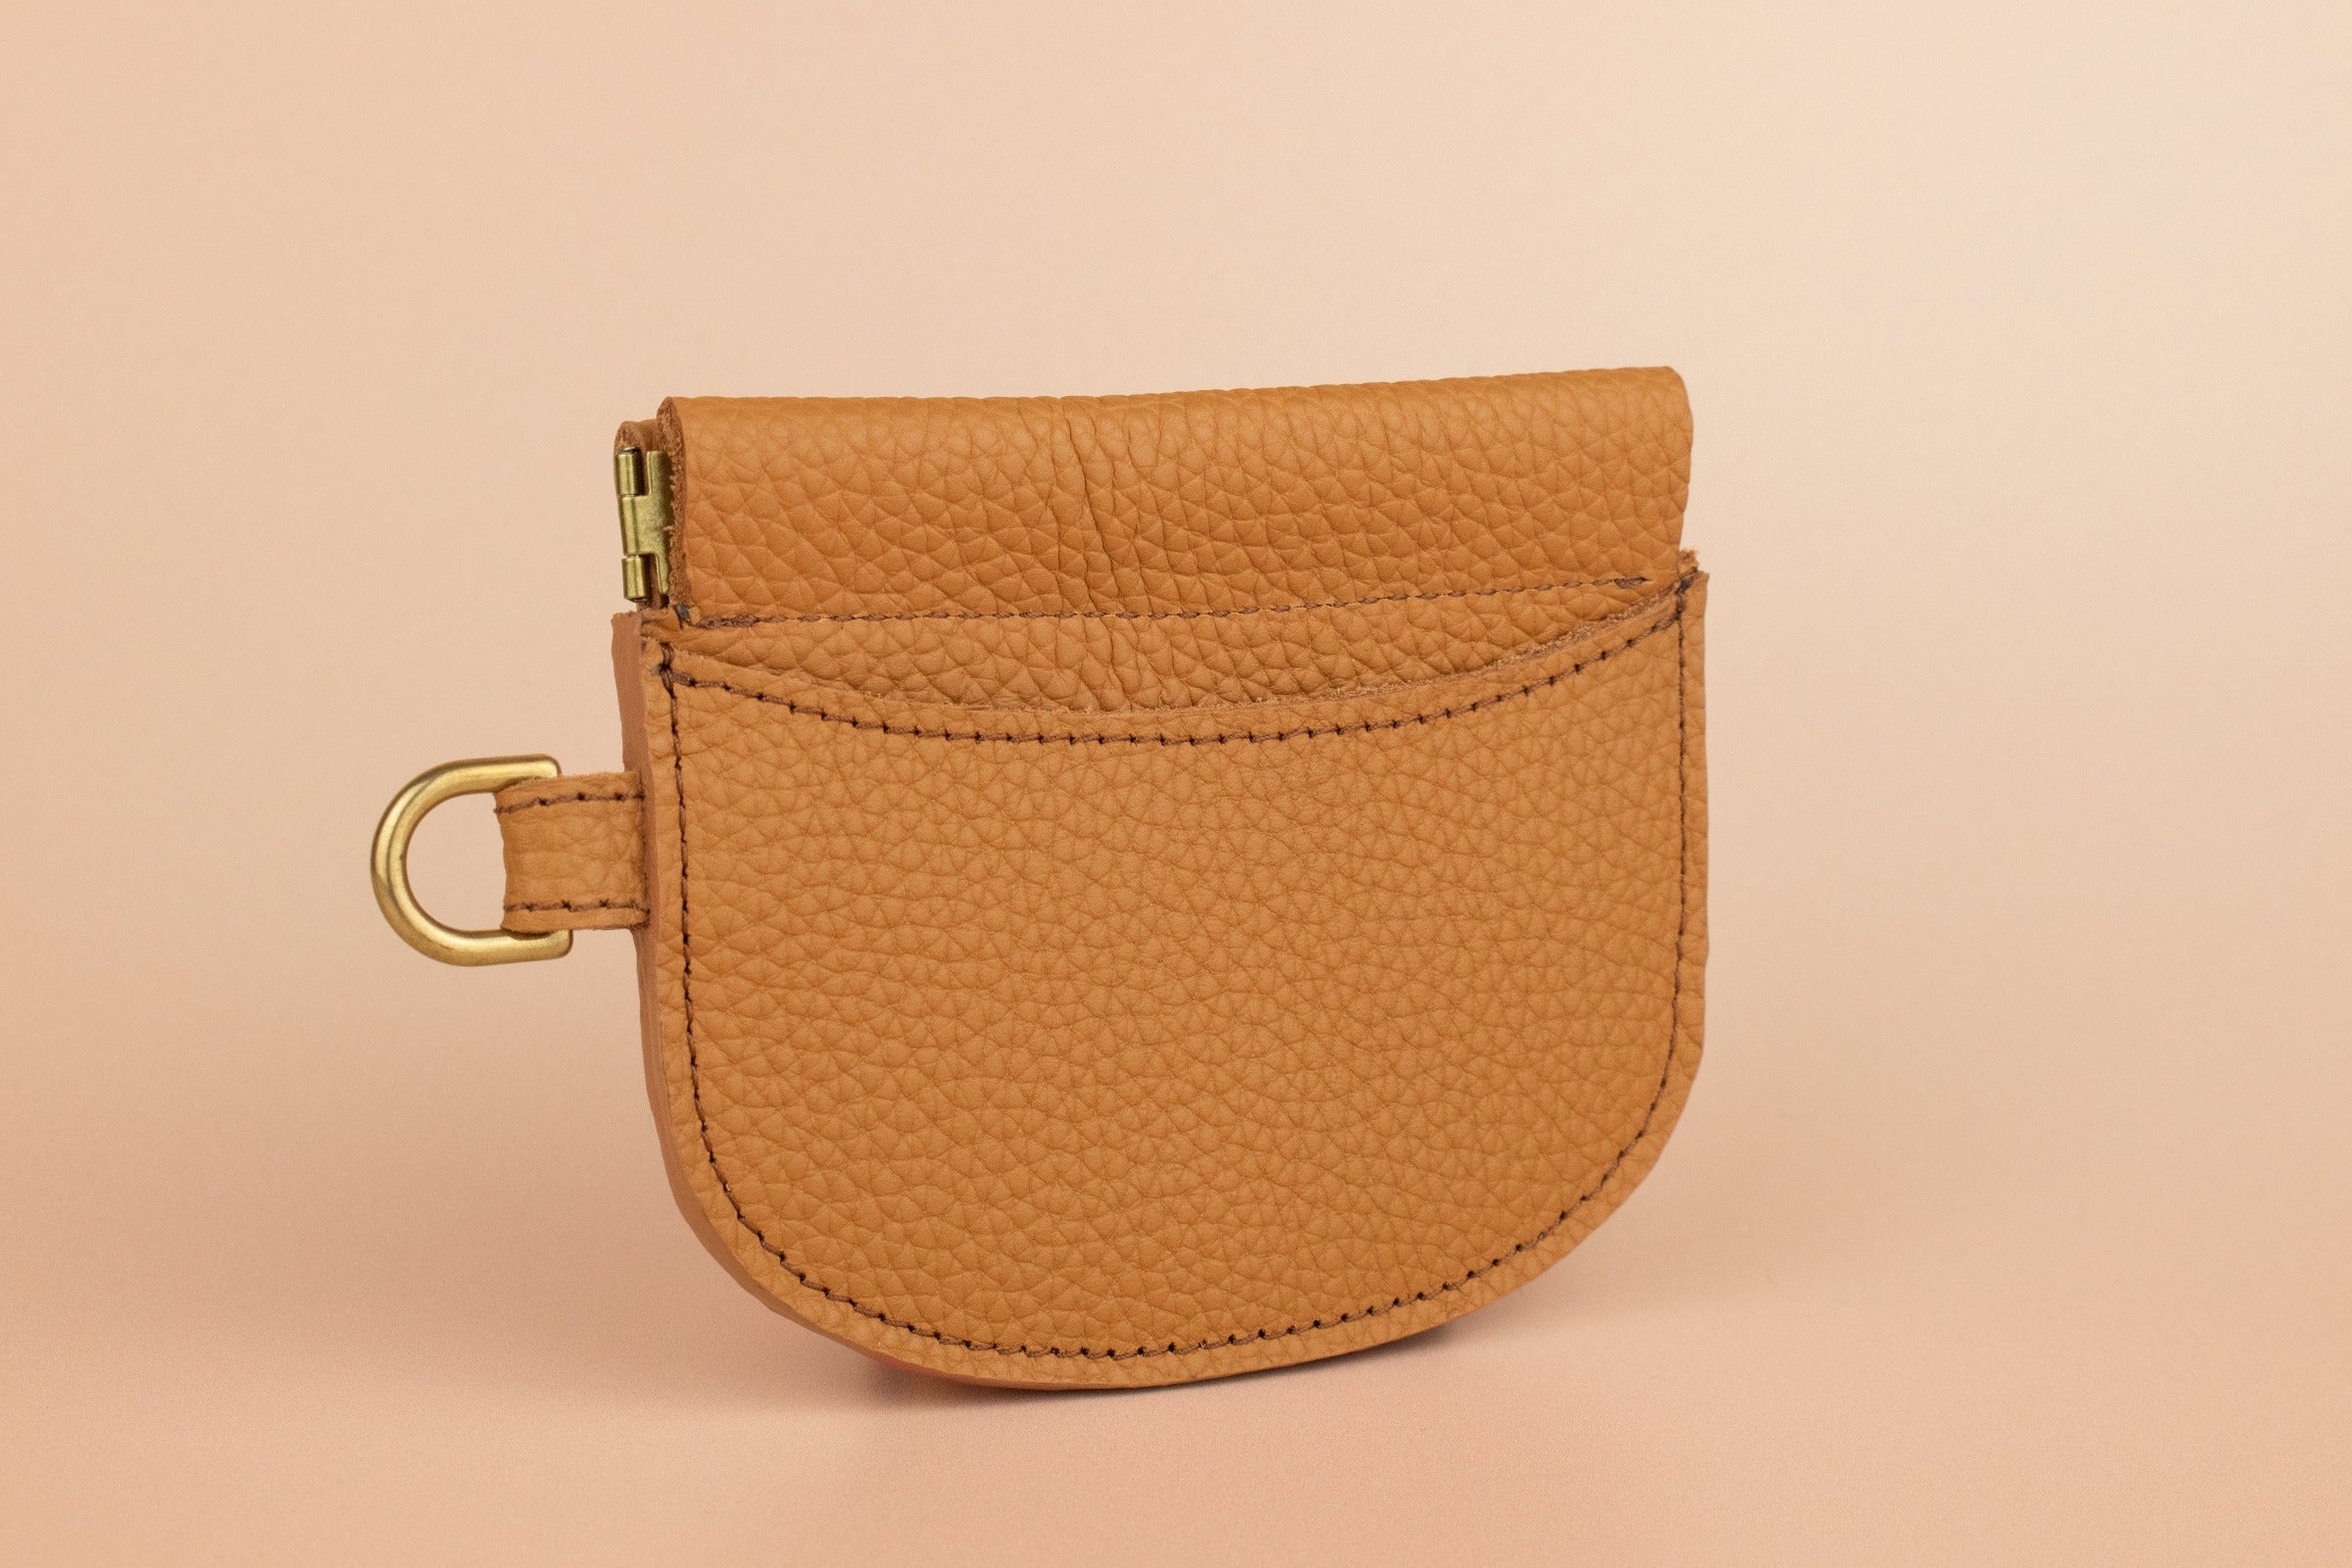 minimal leather card wallet pebble grain leather wristlet in caramel brown with squeeze clasp 